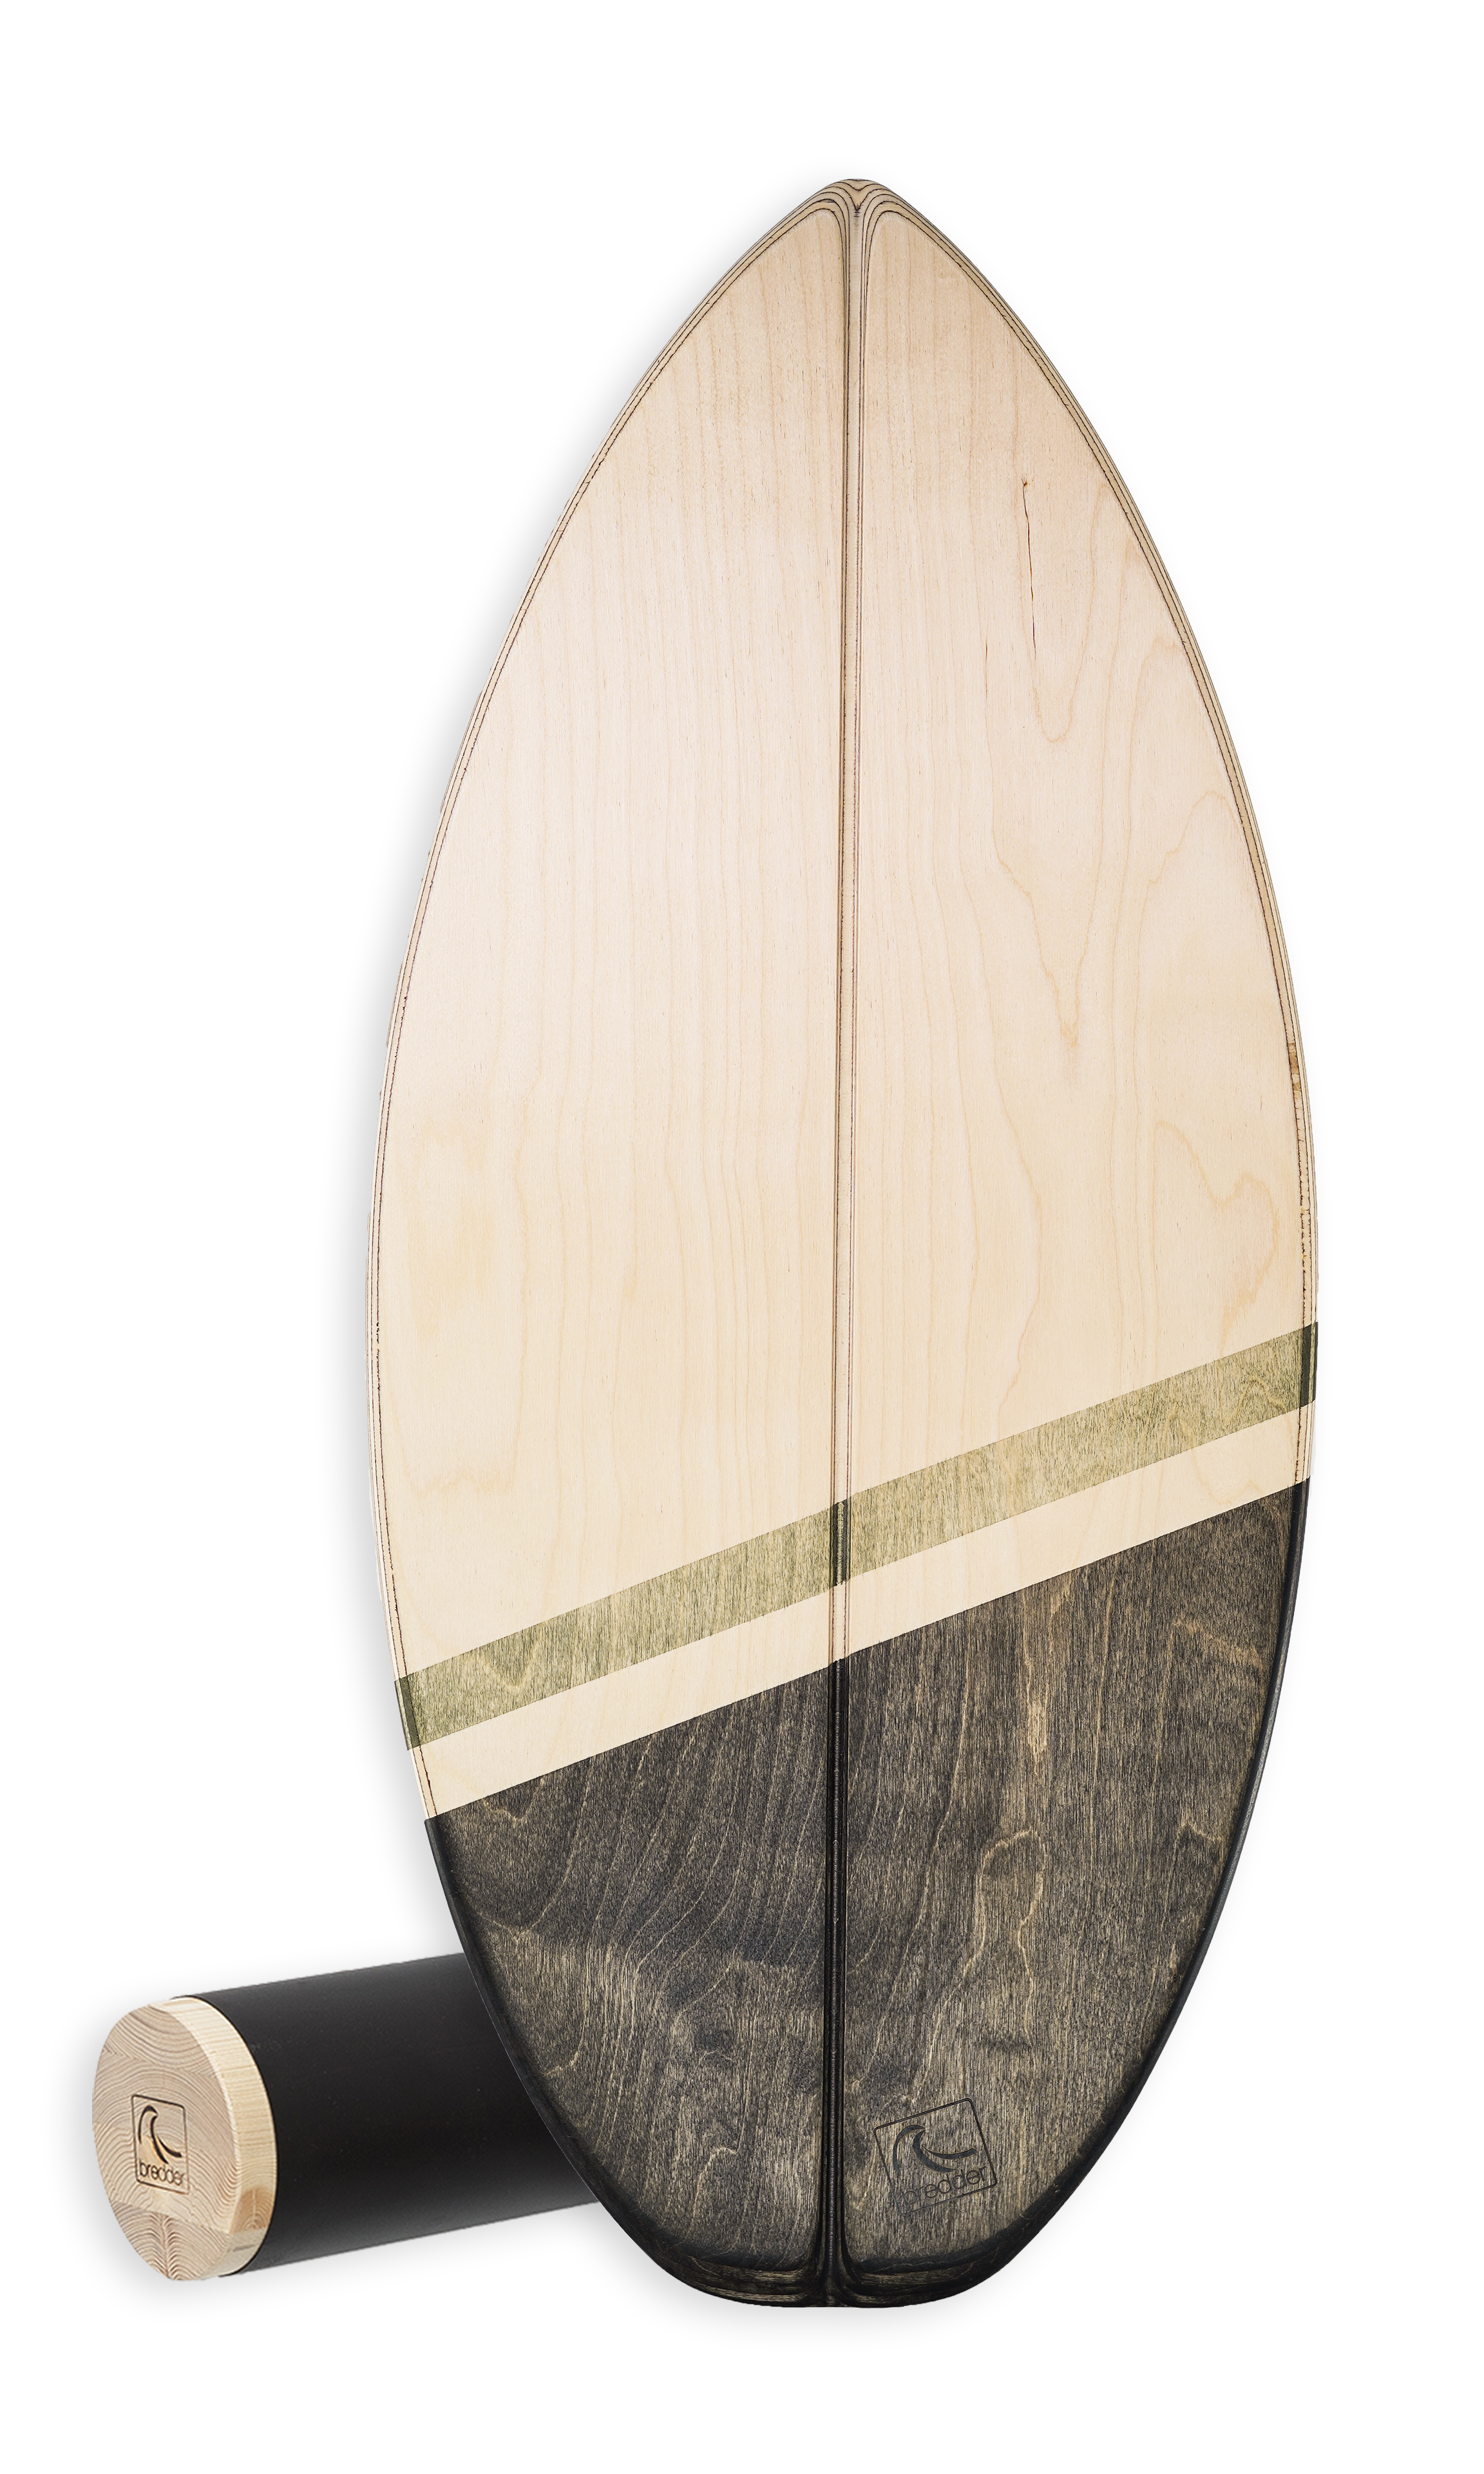 Tei Shorty Balance Board + Vollholzrolle